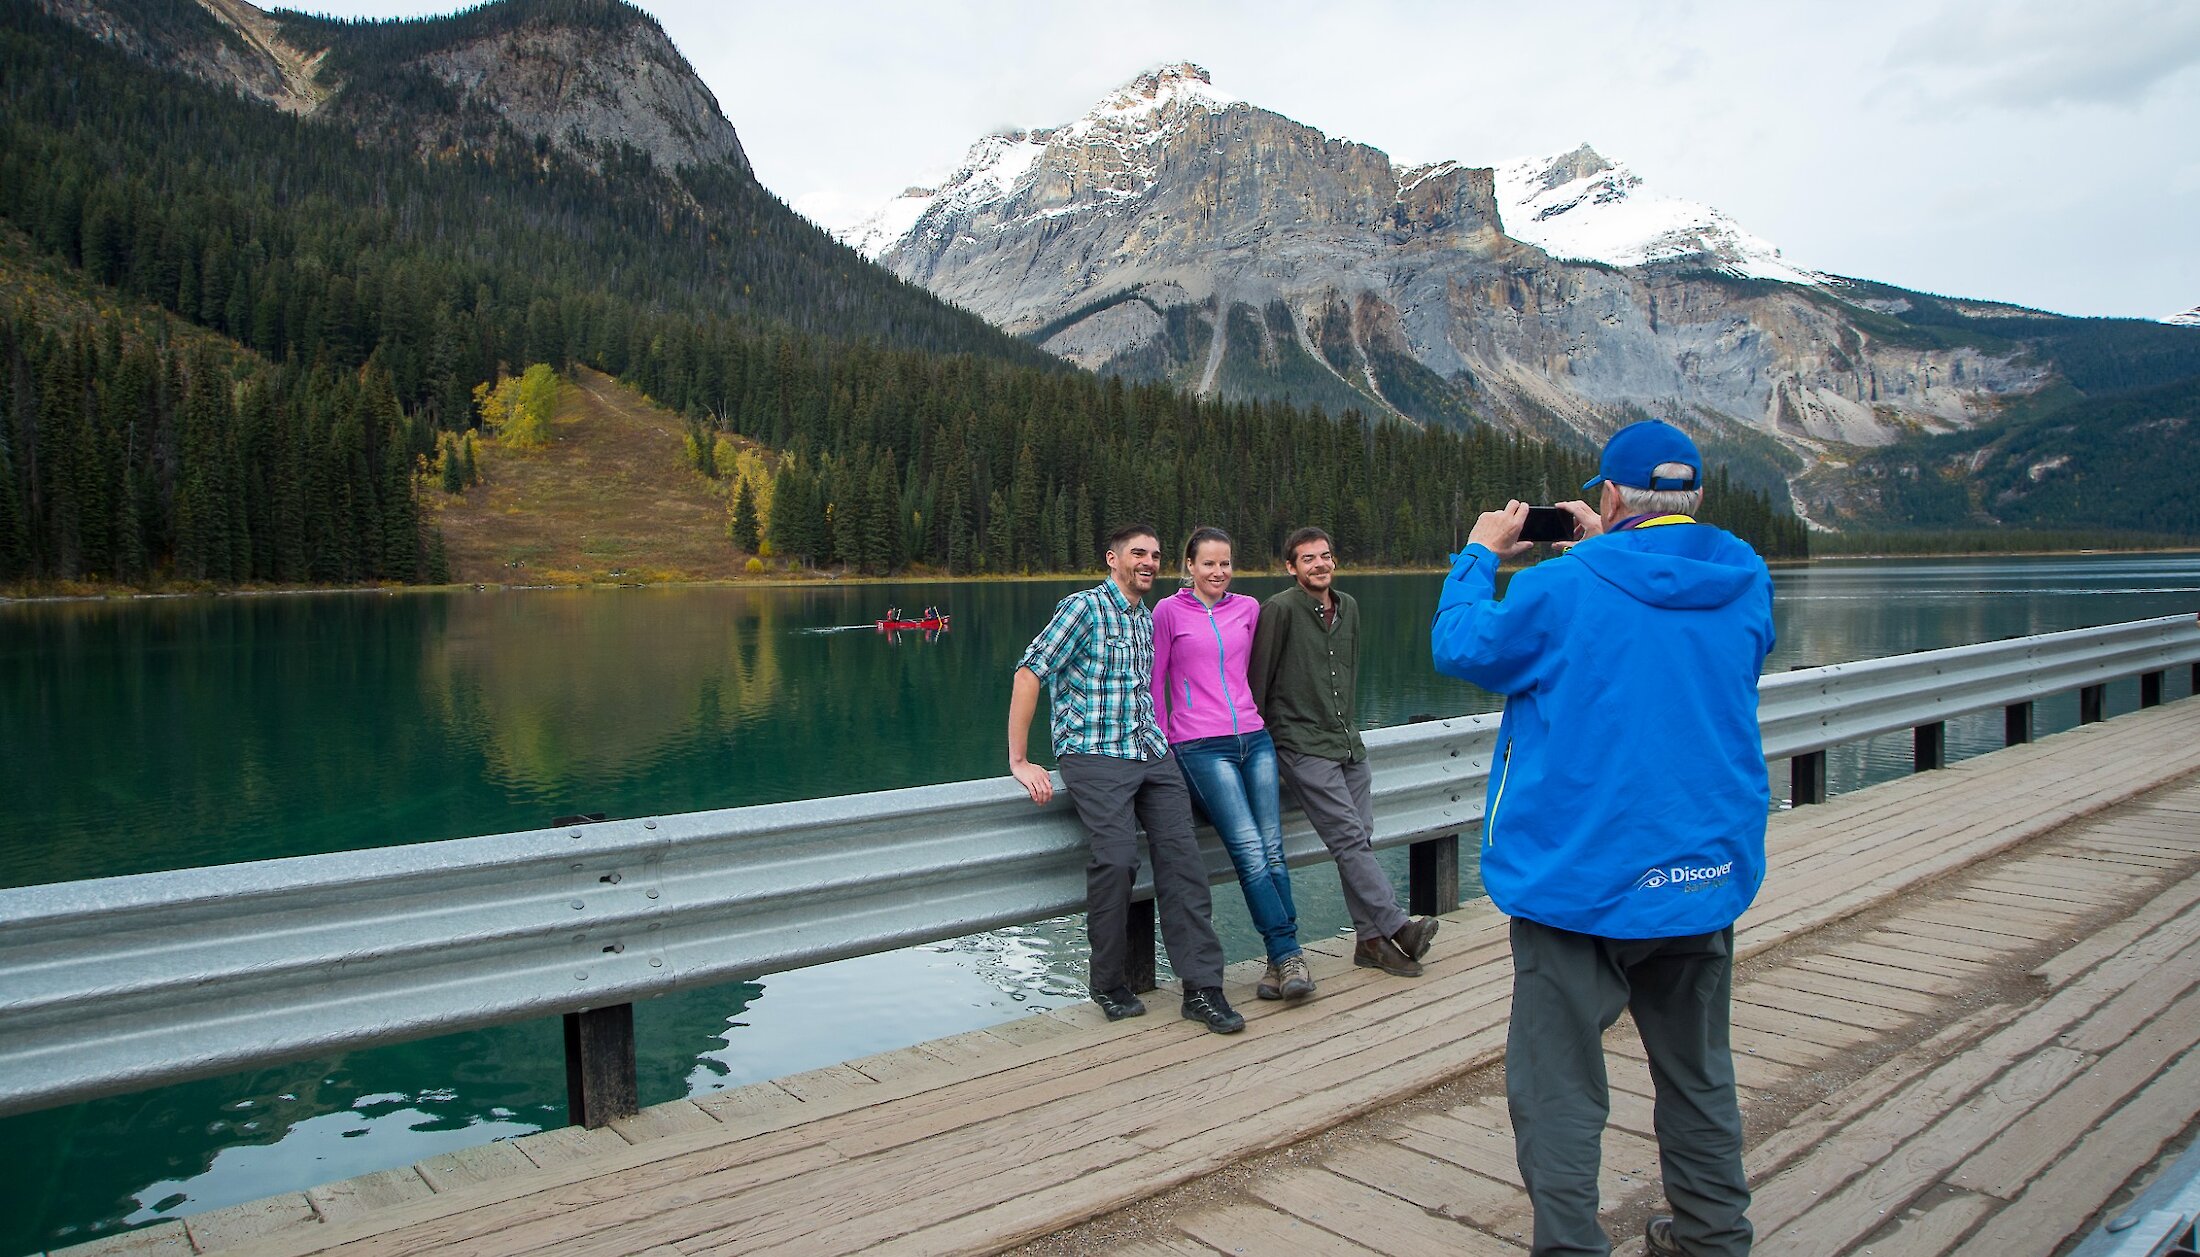 A guide taking a photo of some people at Emerald Lake